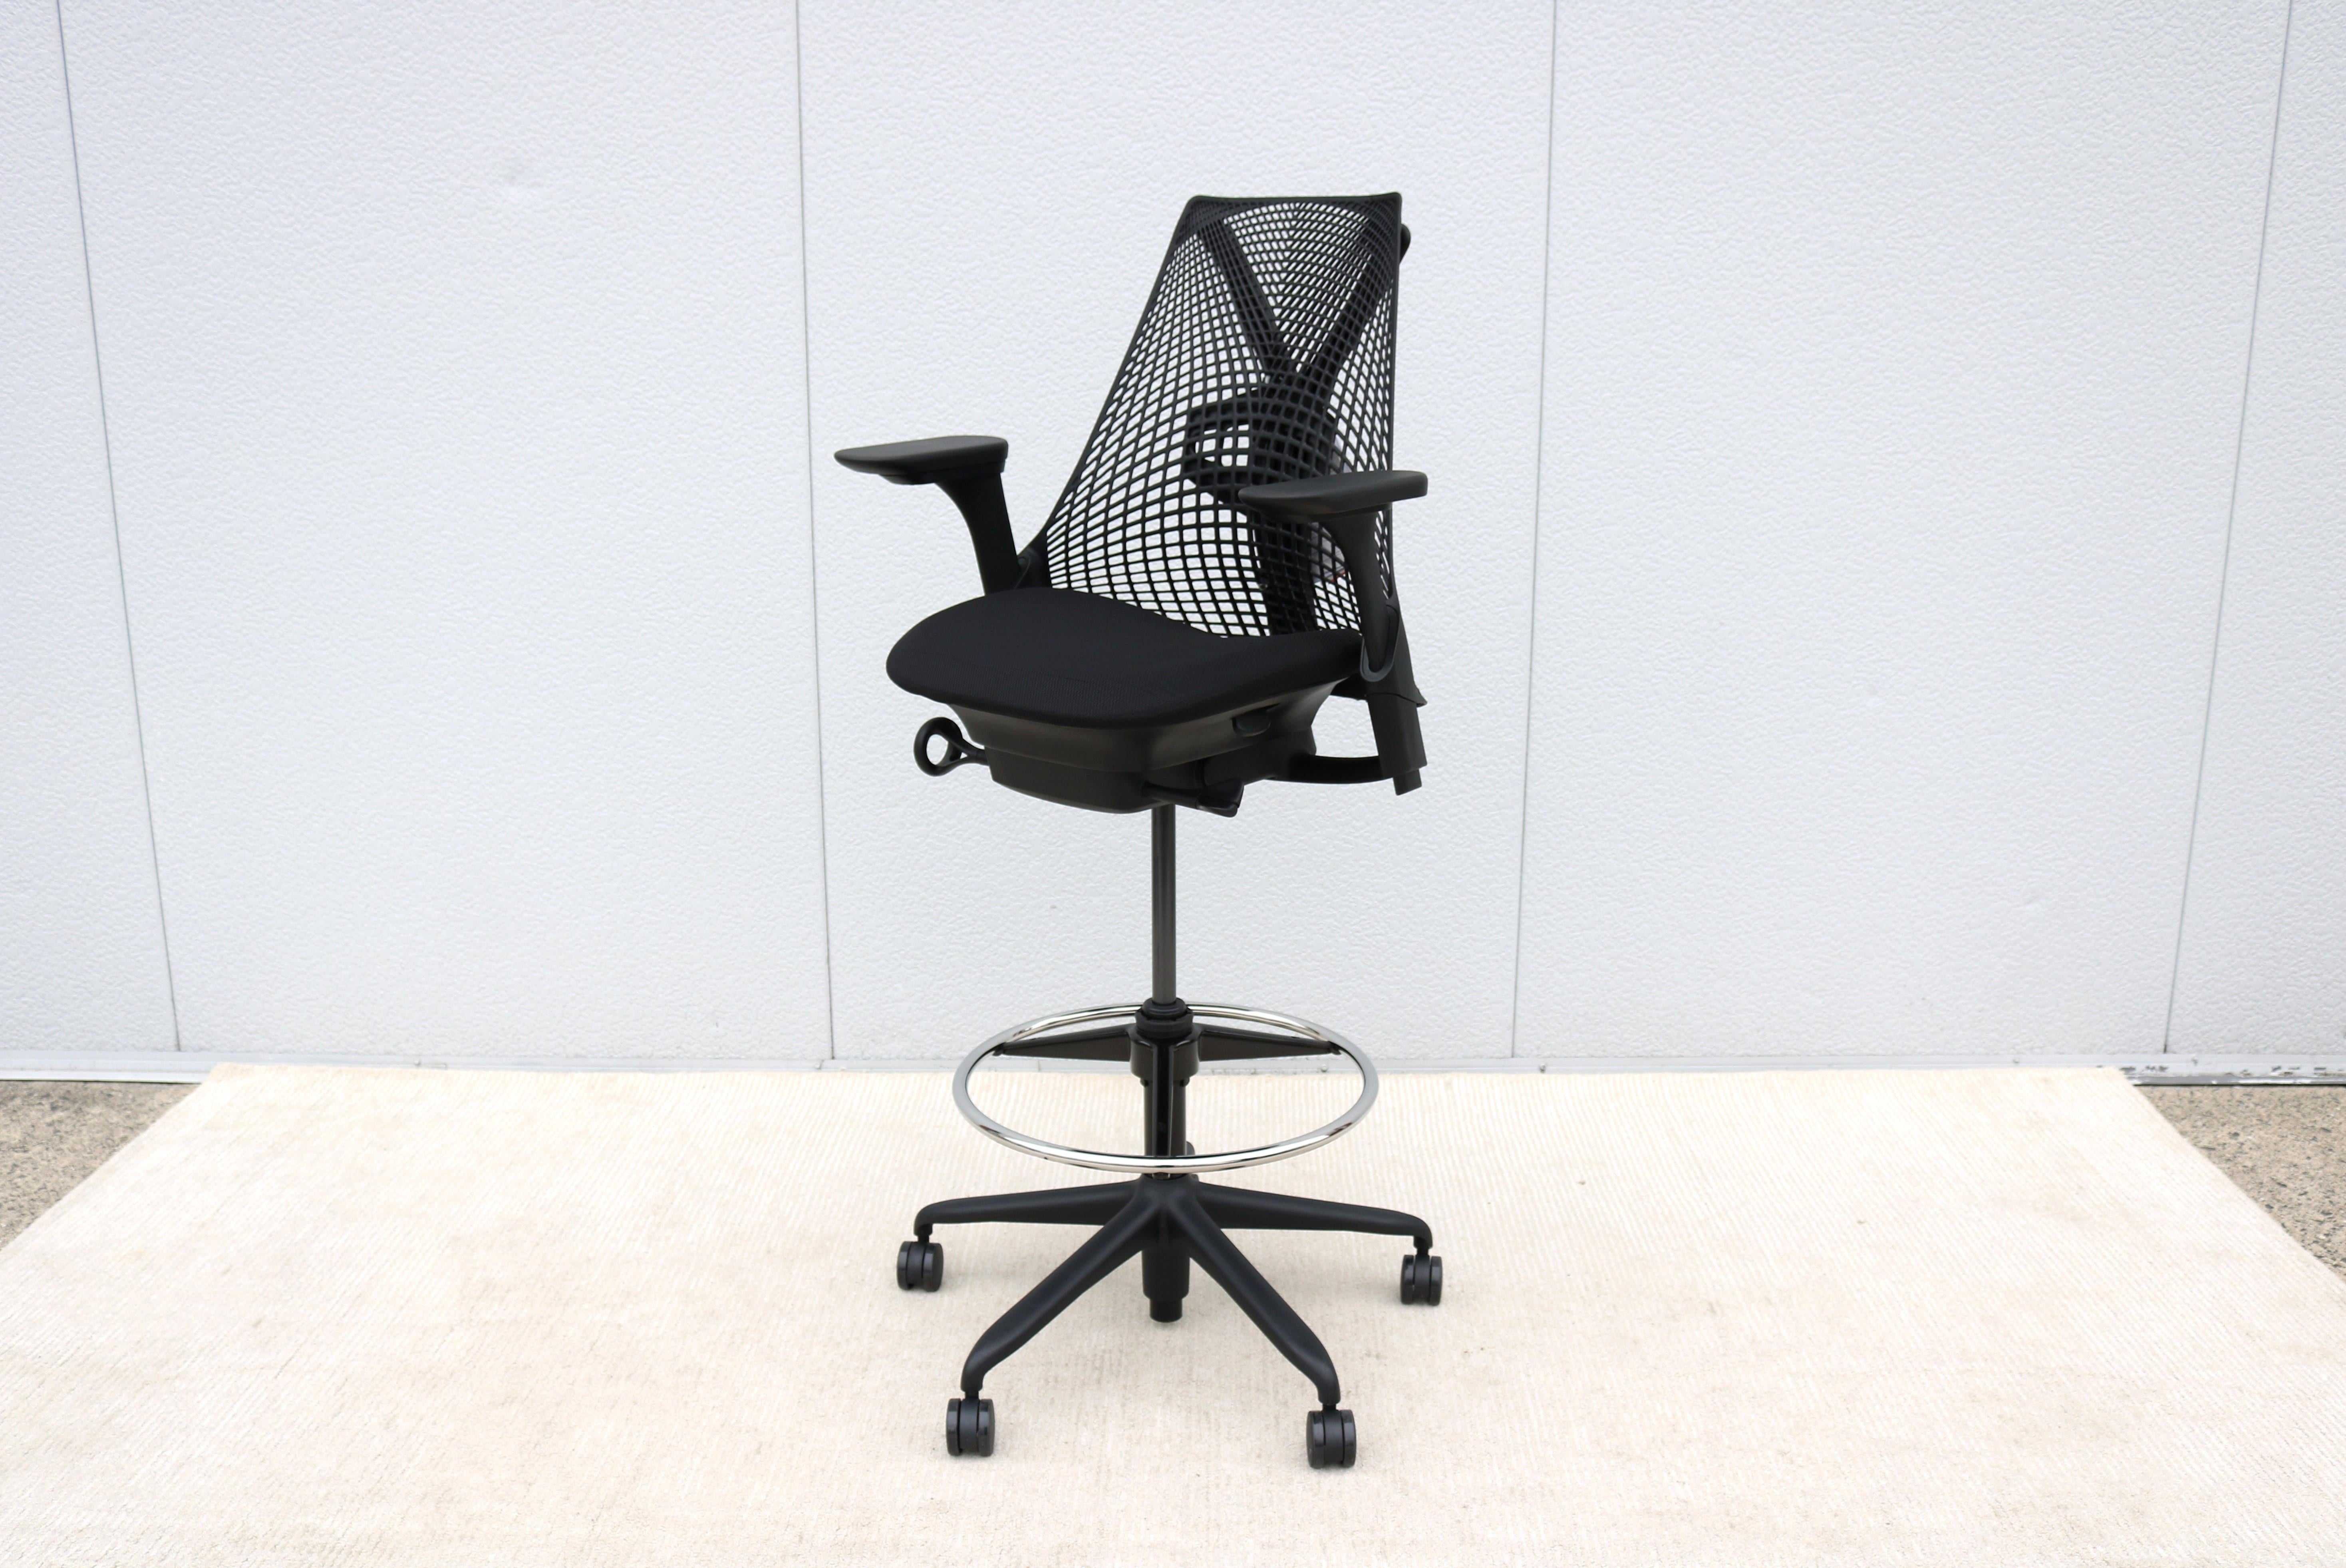 The Sayl chair is well-designed and includes leading-edge ergonomics.
A smart chair that sets a reference point in its class for performance, ergonomics, quality, elegant styling, superior engineering, and visually striking appearance.
The organic